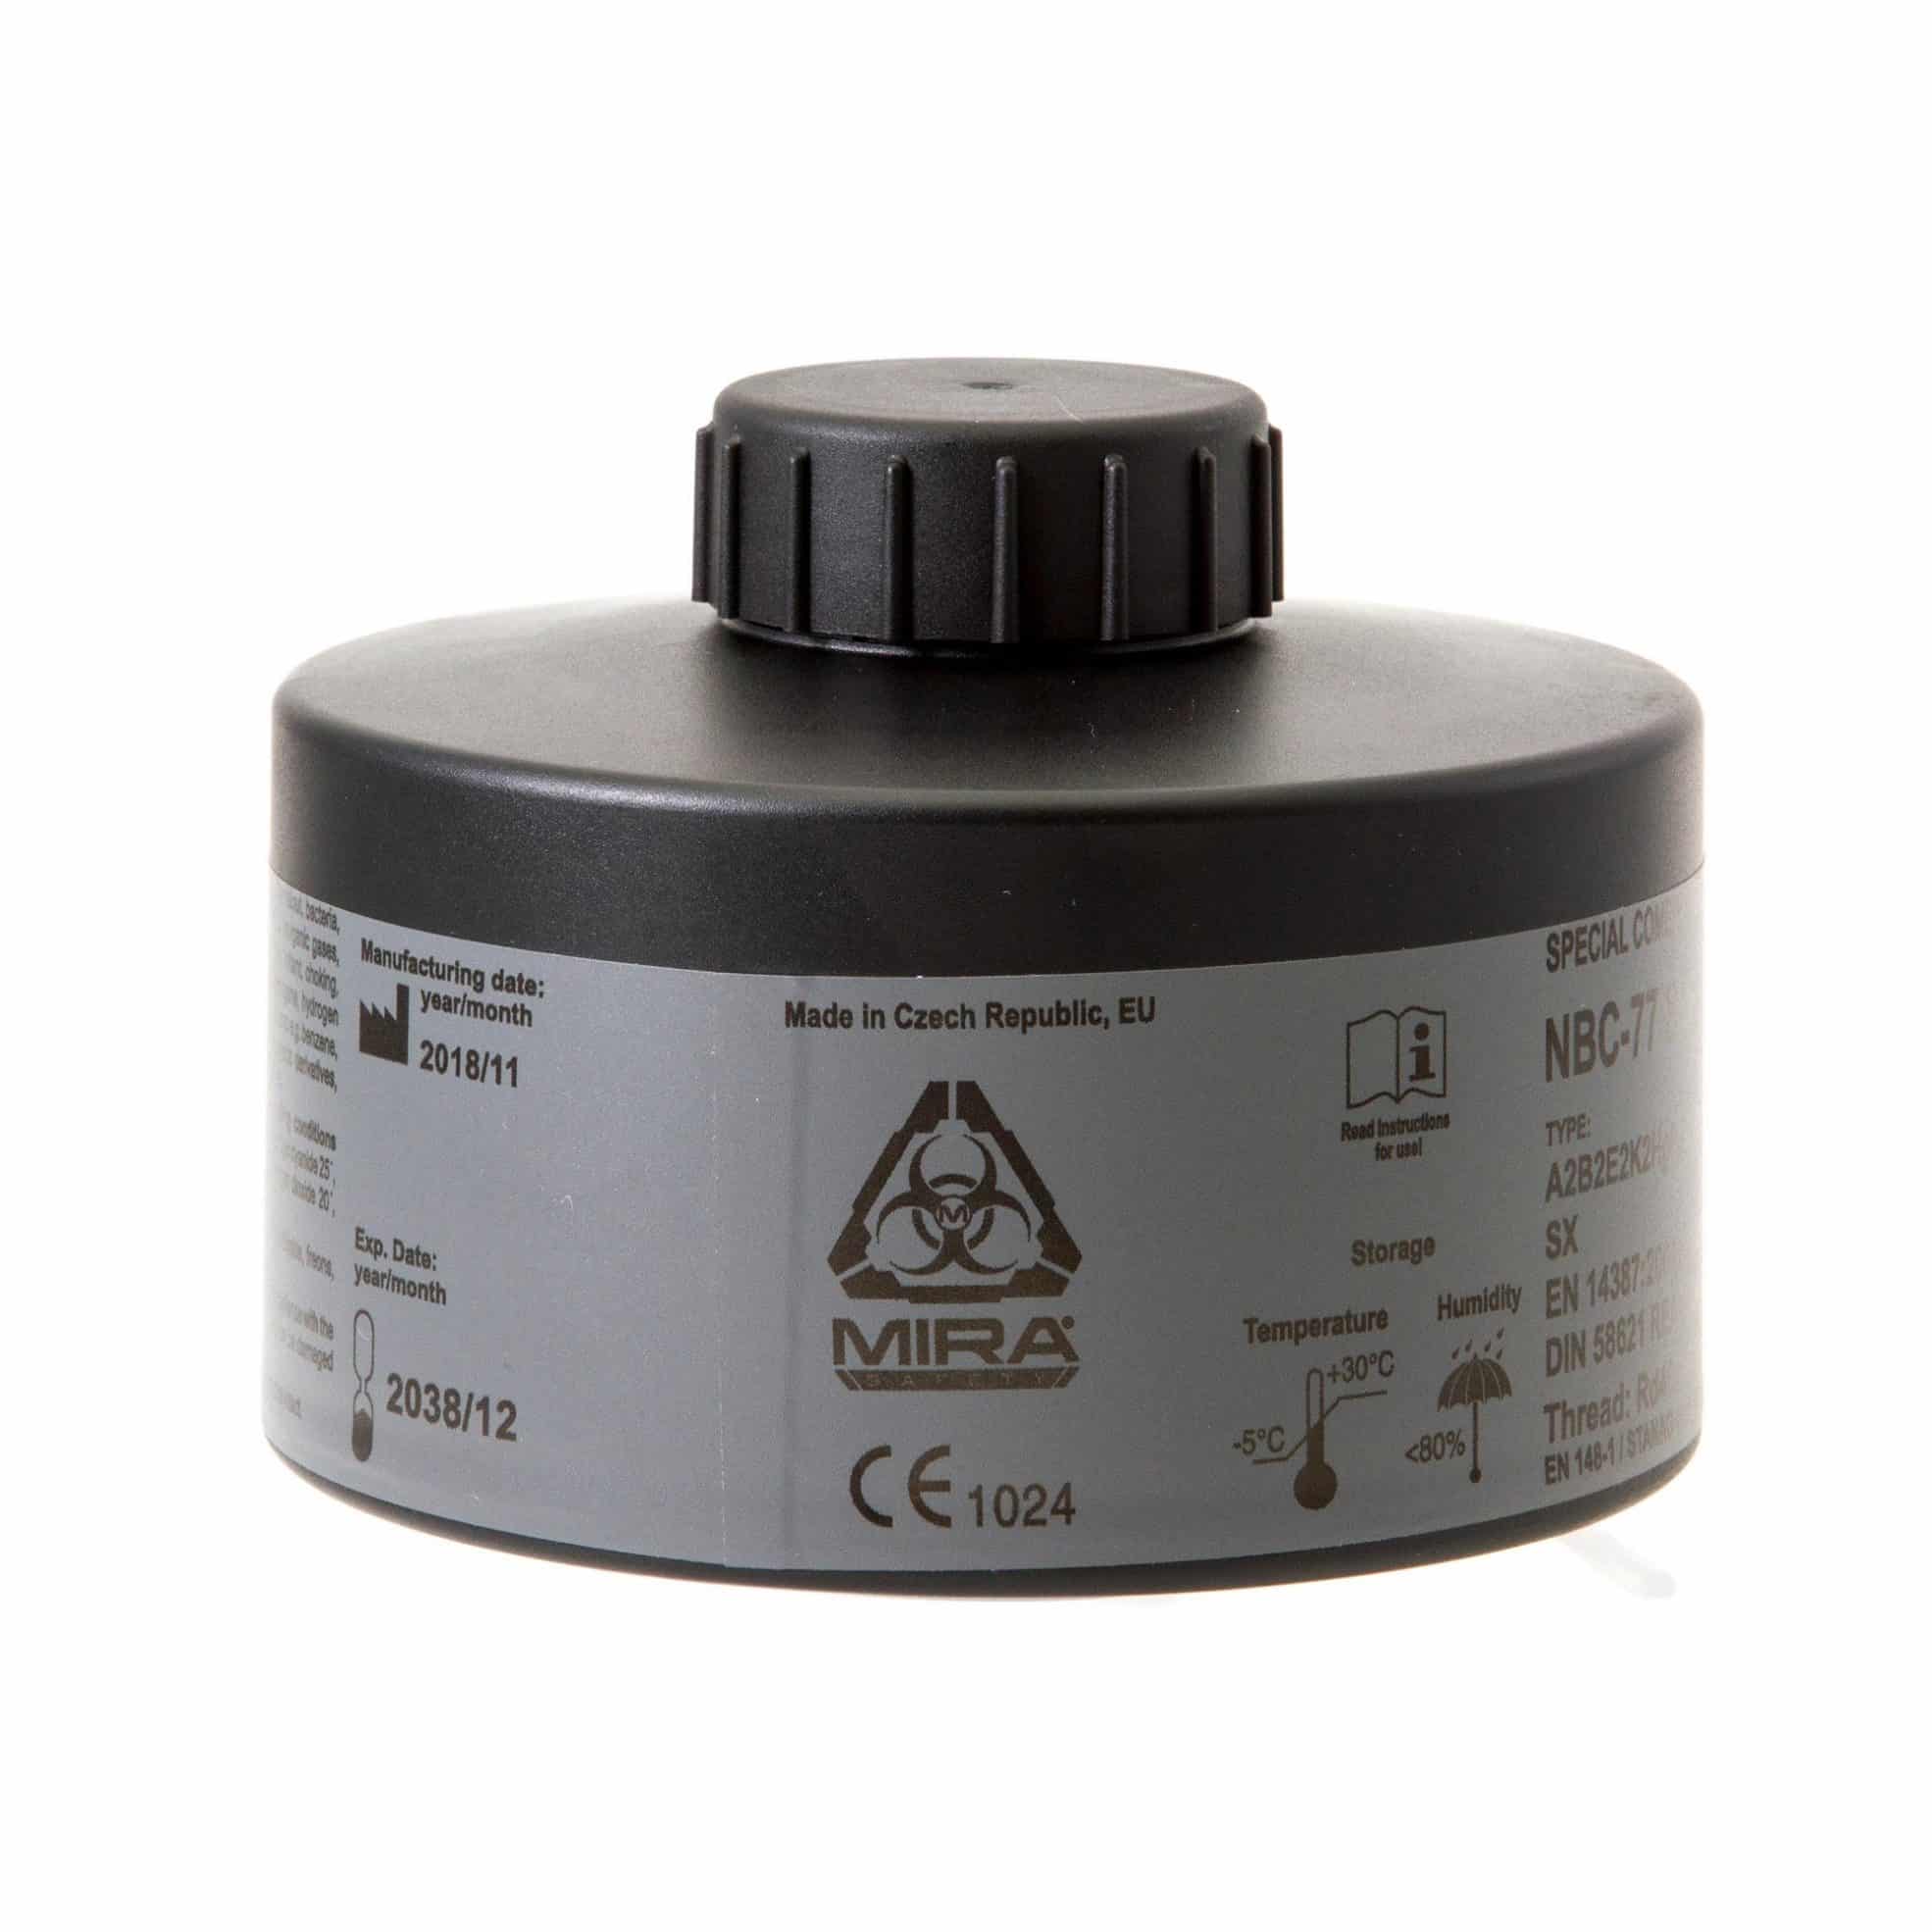 CBRN Gas Mask Filter - Protects Against CBRN Agents, Industrial Toxic Gases and Mo...